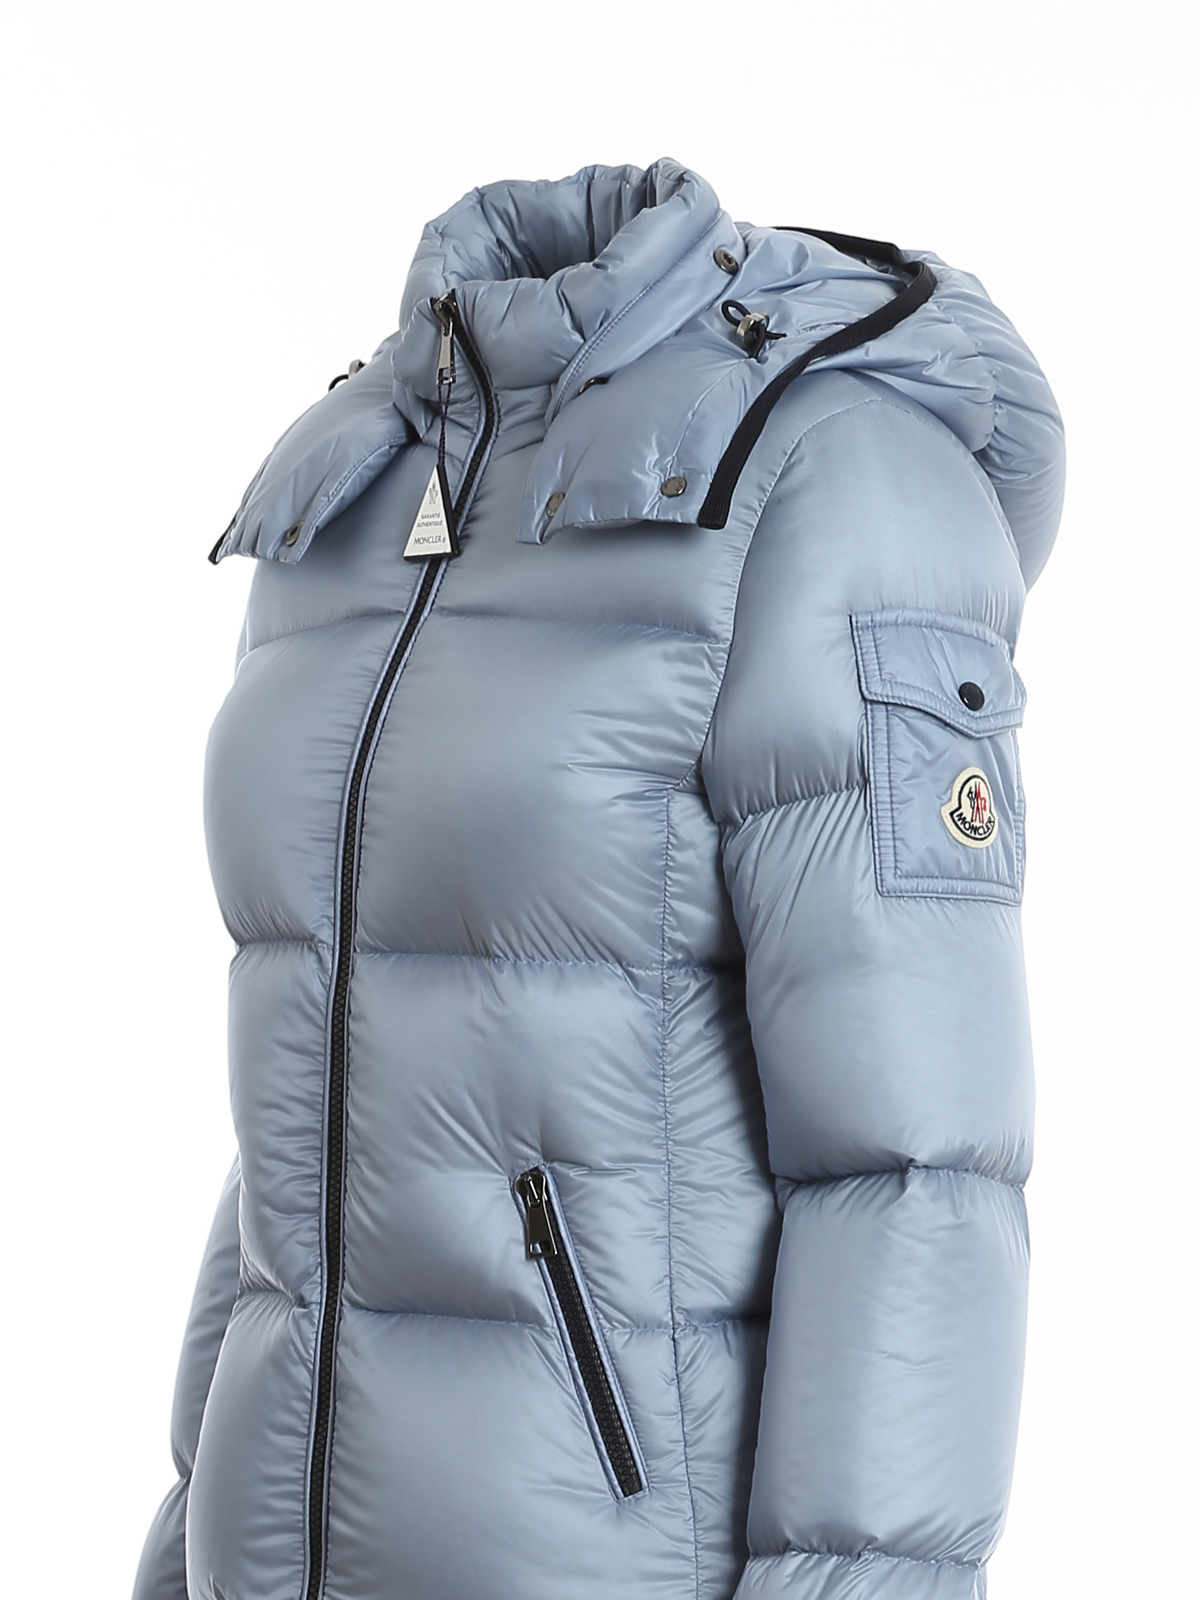 Mens Moncler Puffer Jacket Clearance Store, Save 70% | jlcatj.gob.mx